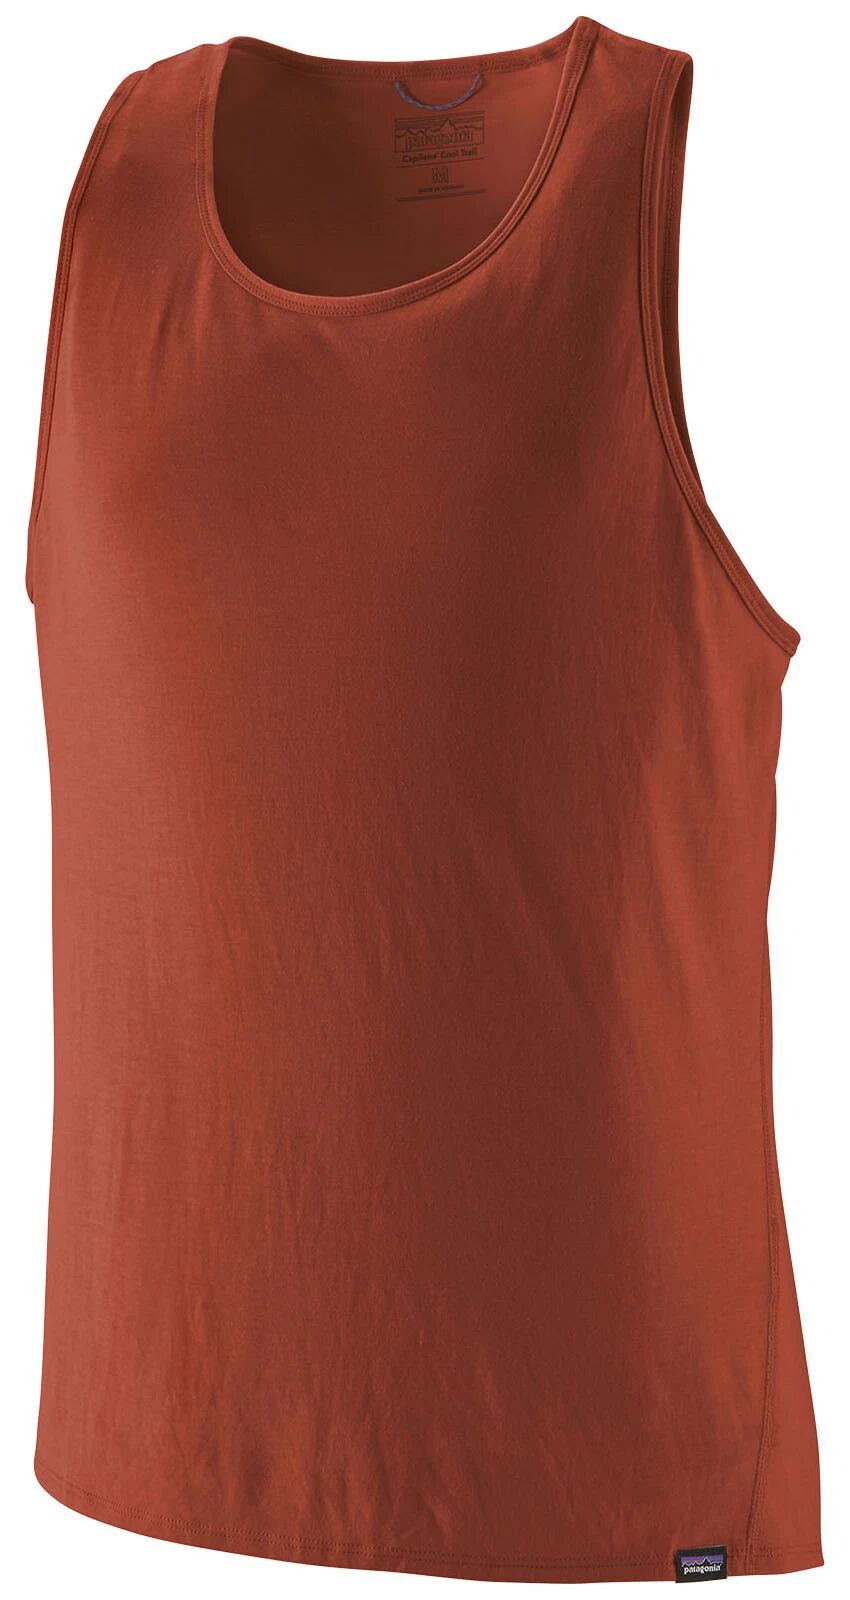 Patagonia Women's Capilene Cool Trail Tank Top, XL, Red